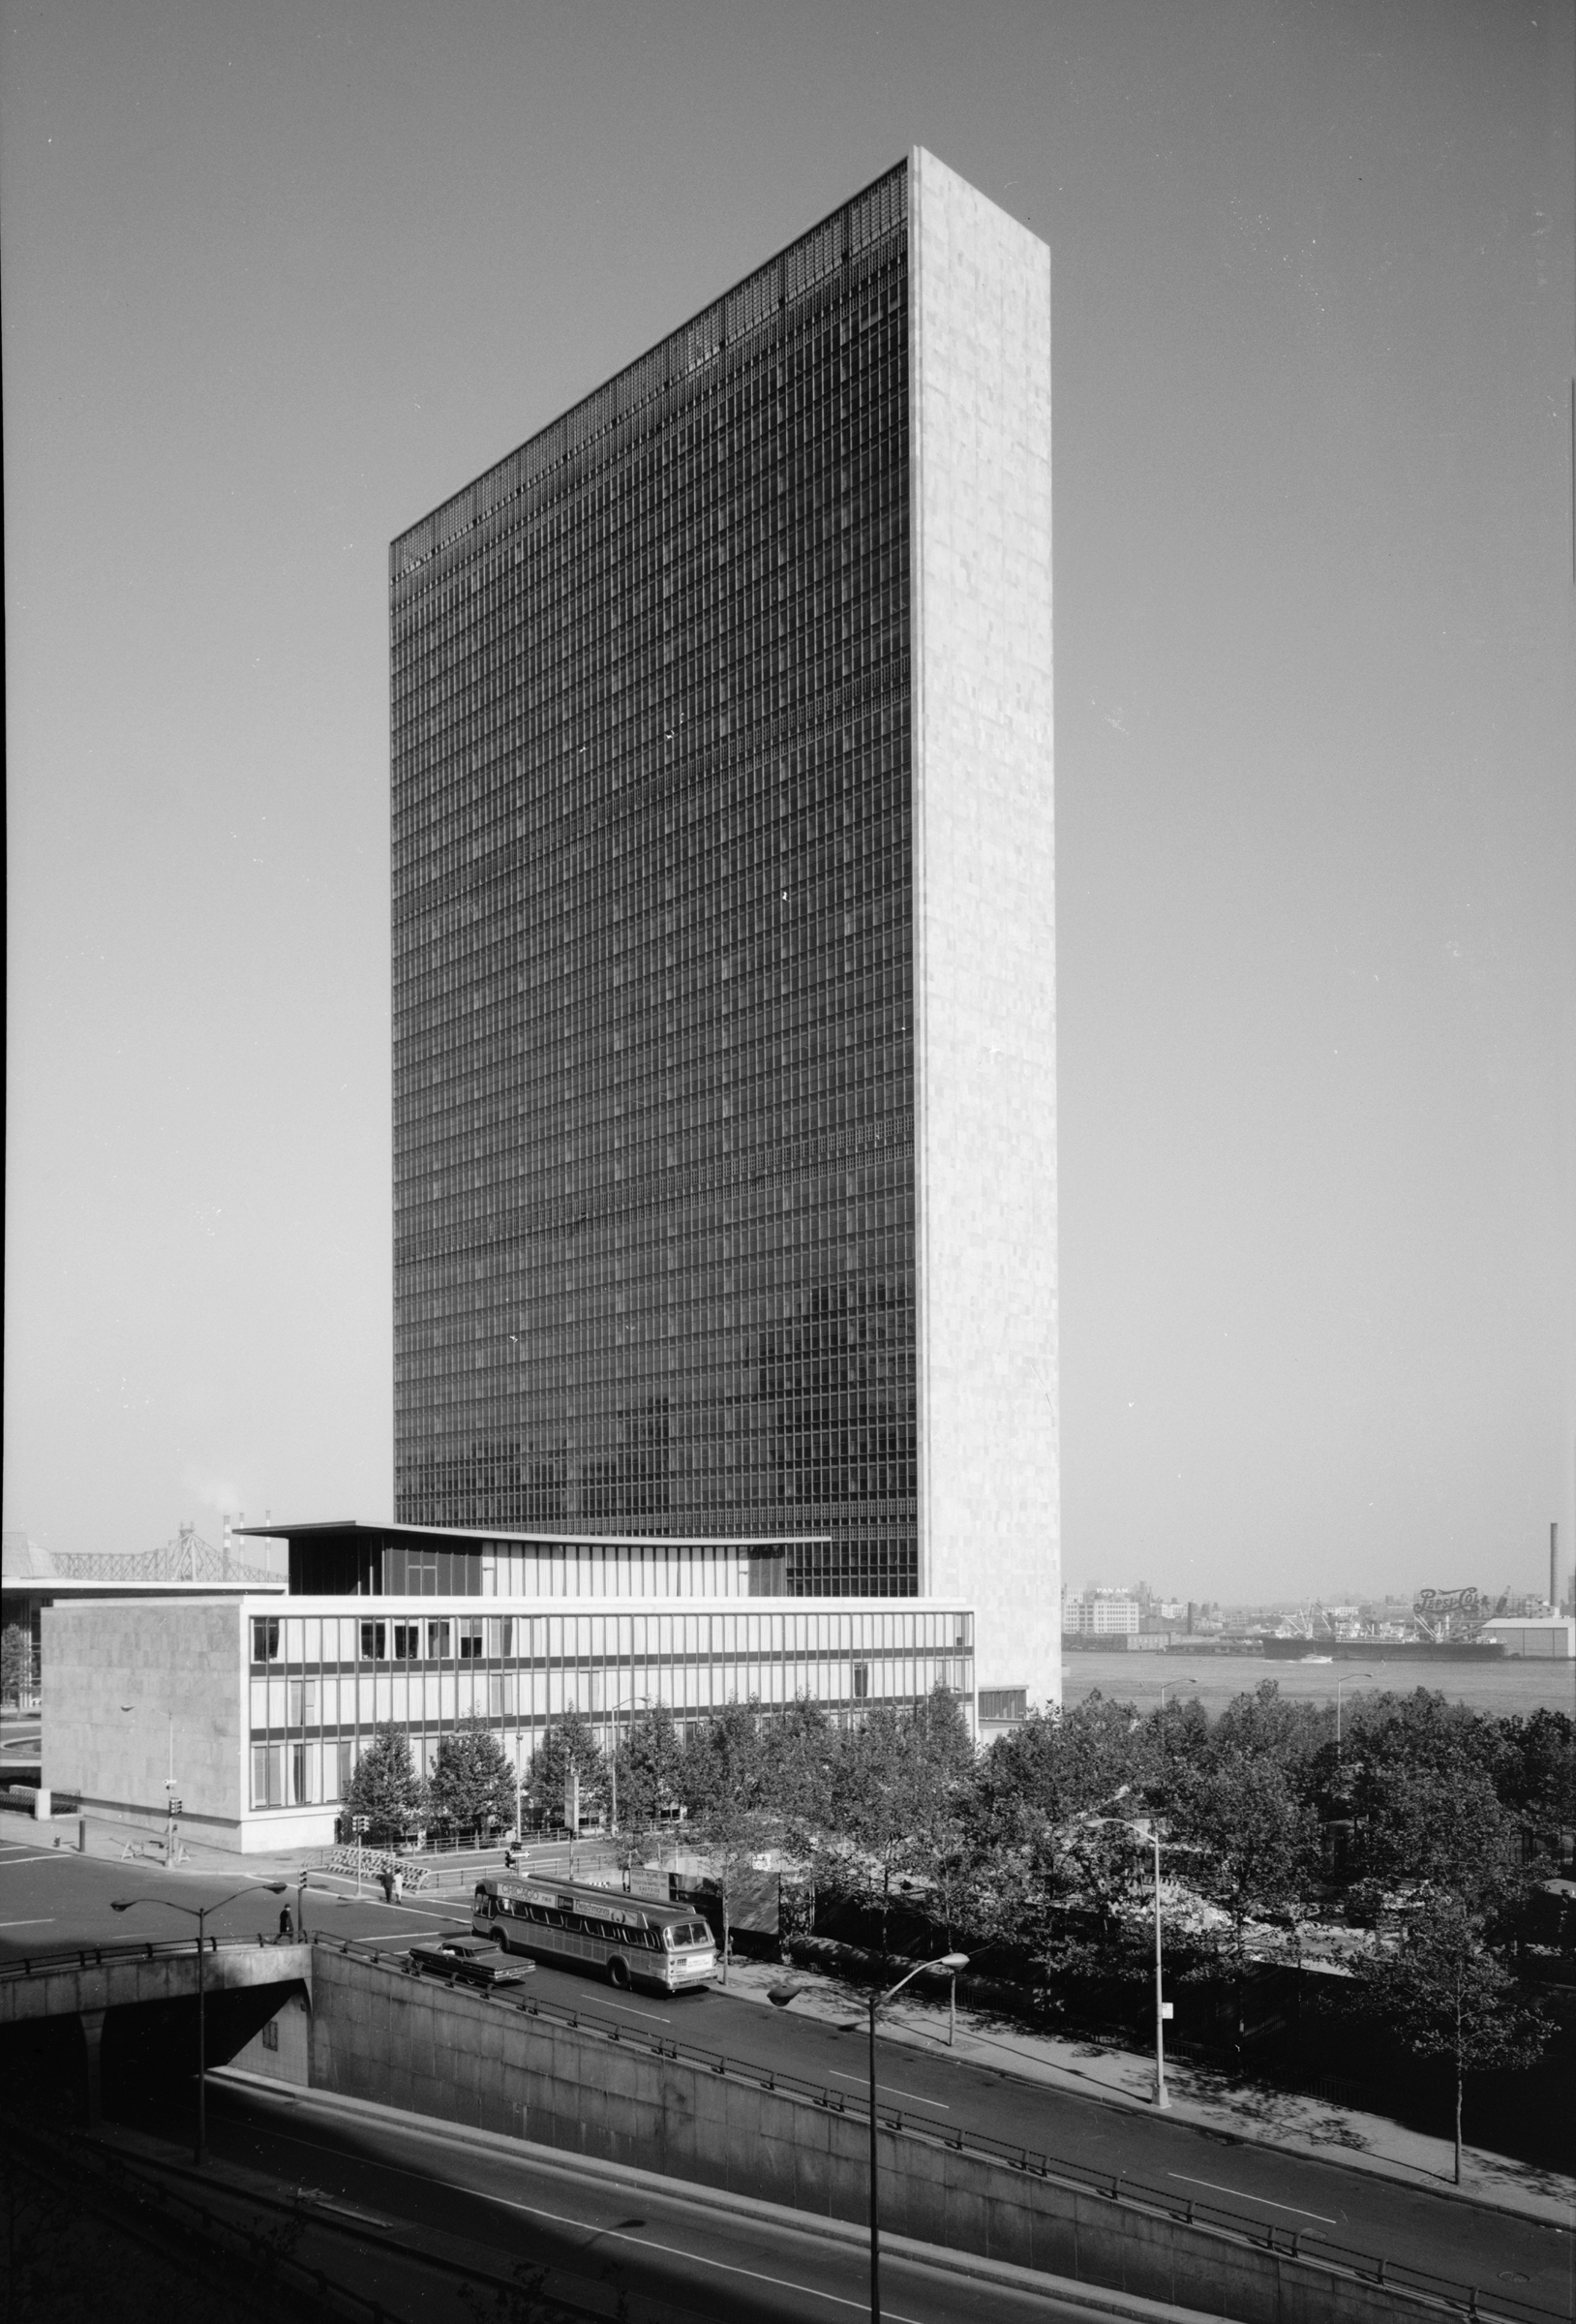 United Nations Headquarters. Photo from the Historic American Buildings Survey (HABS) and the Historic American Engineering Record (HAER) collections — U.S. National Park Service program.